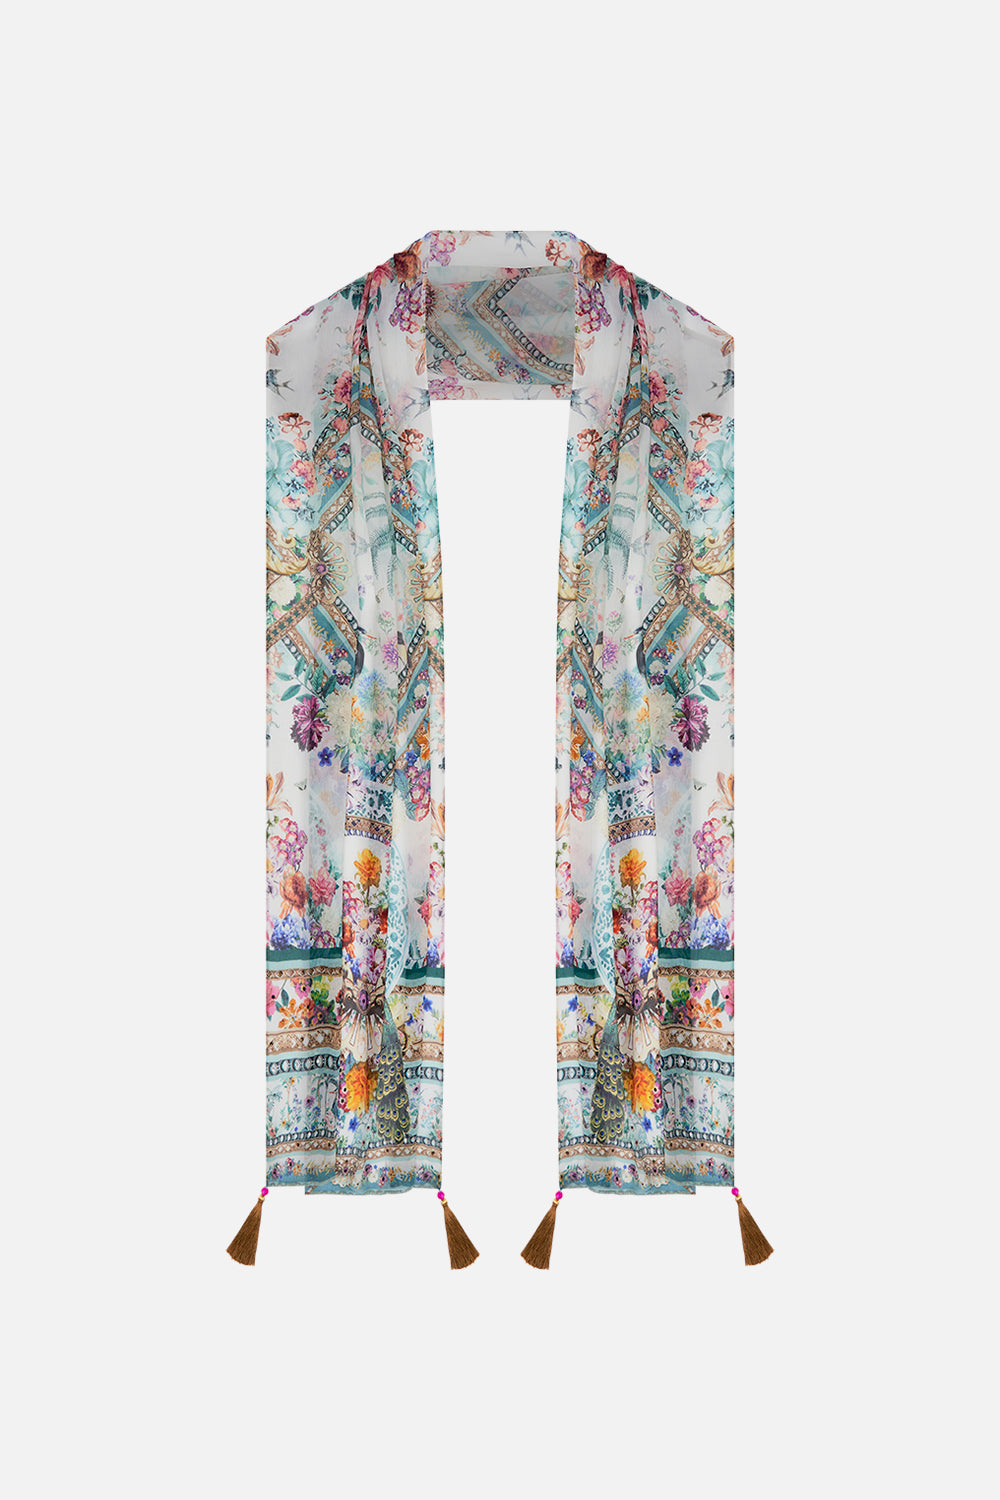 CAMILLA silk scarf in plumes and Parterres print